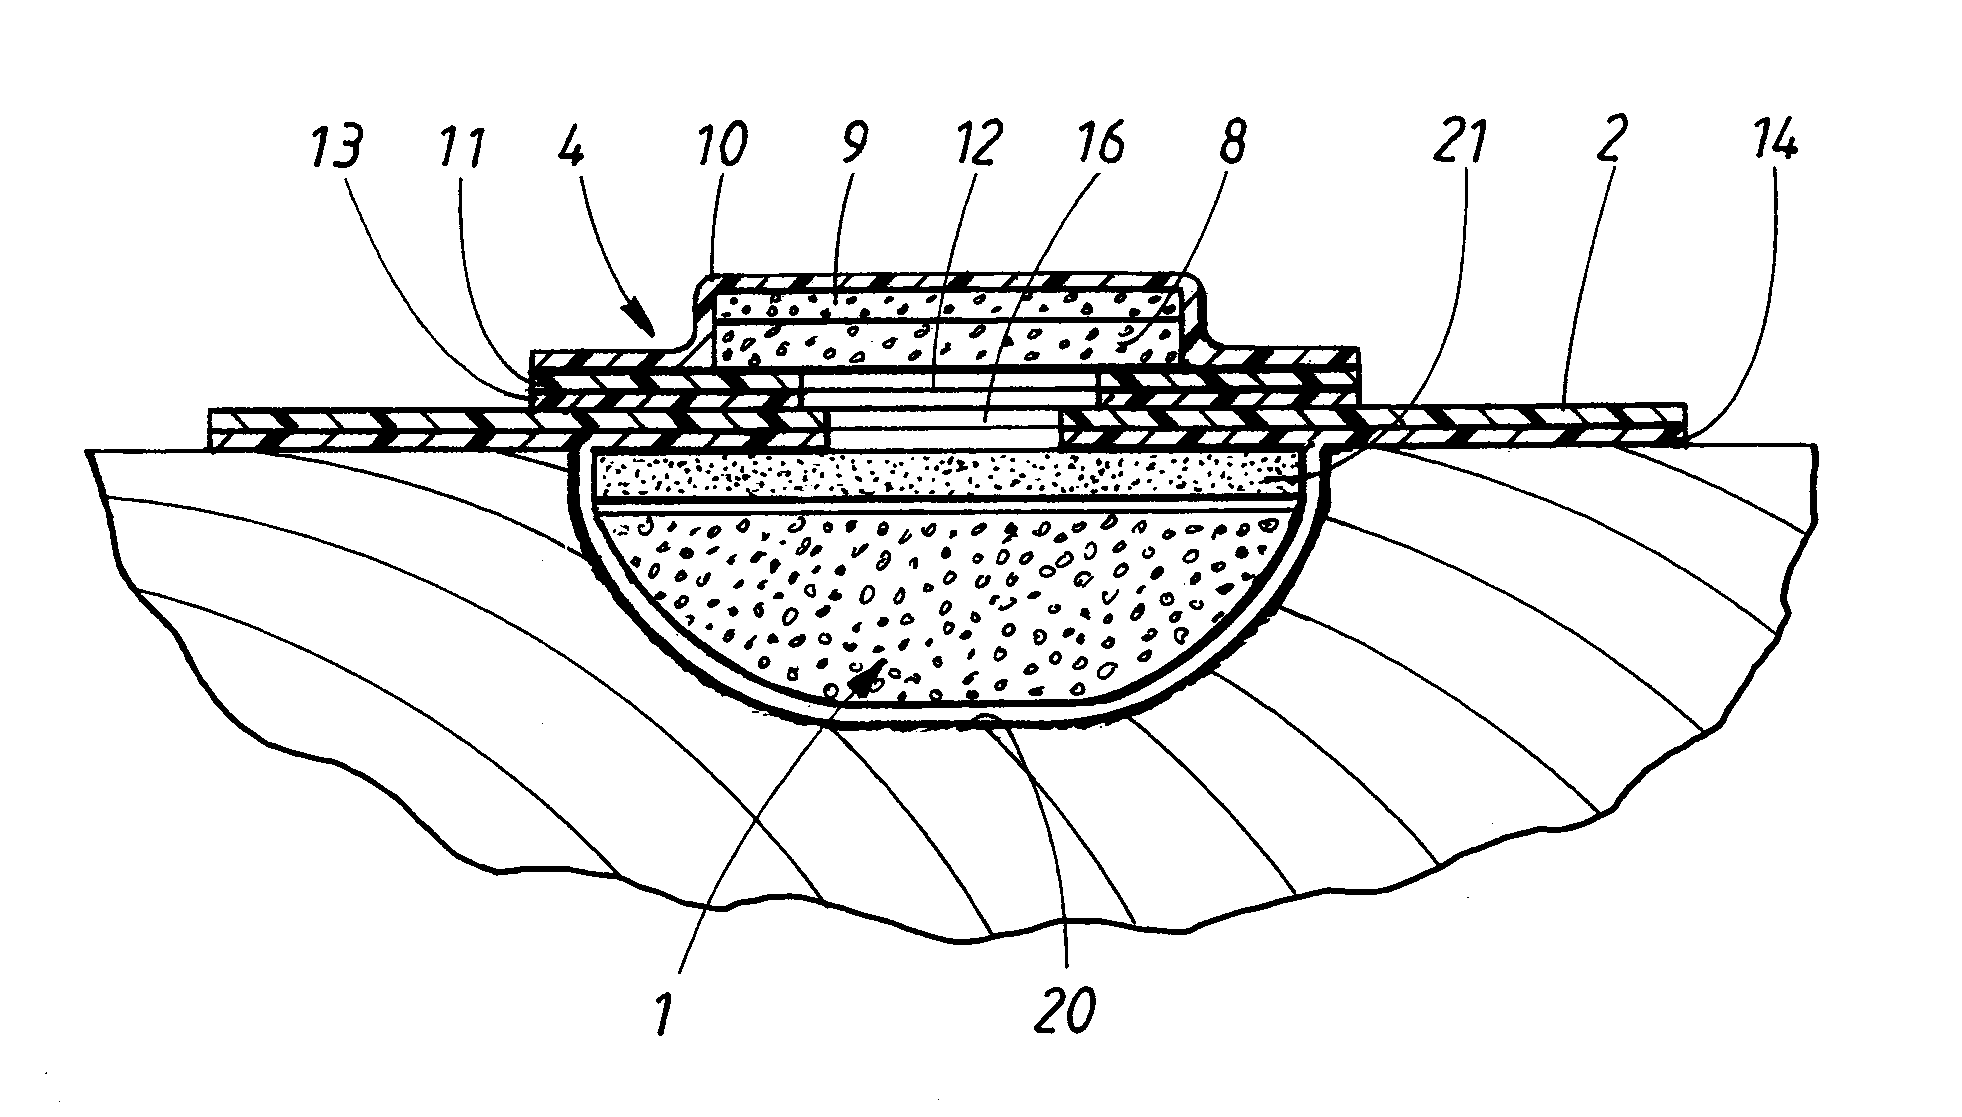 Device for treatment of wounds with reduced pressure